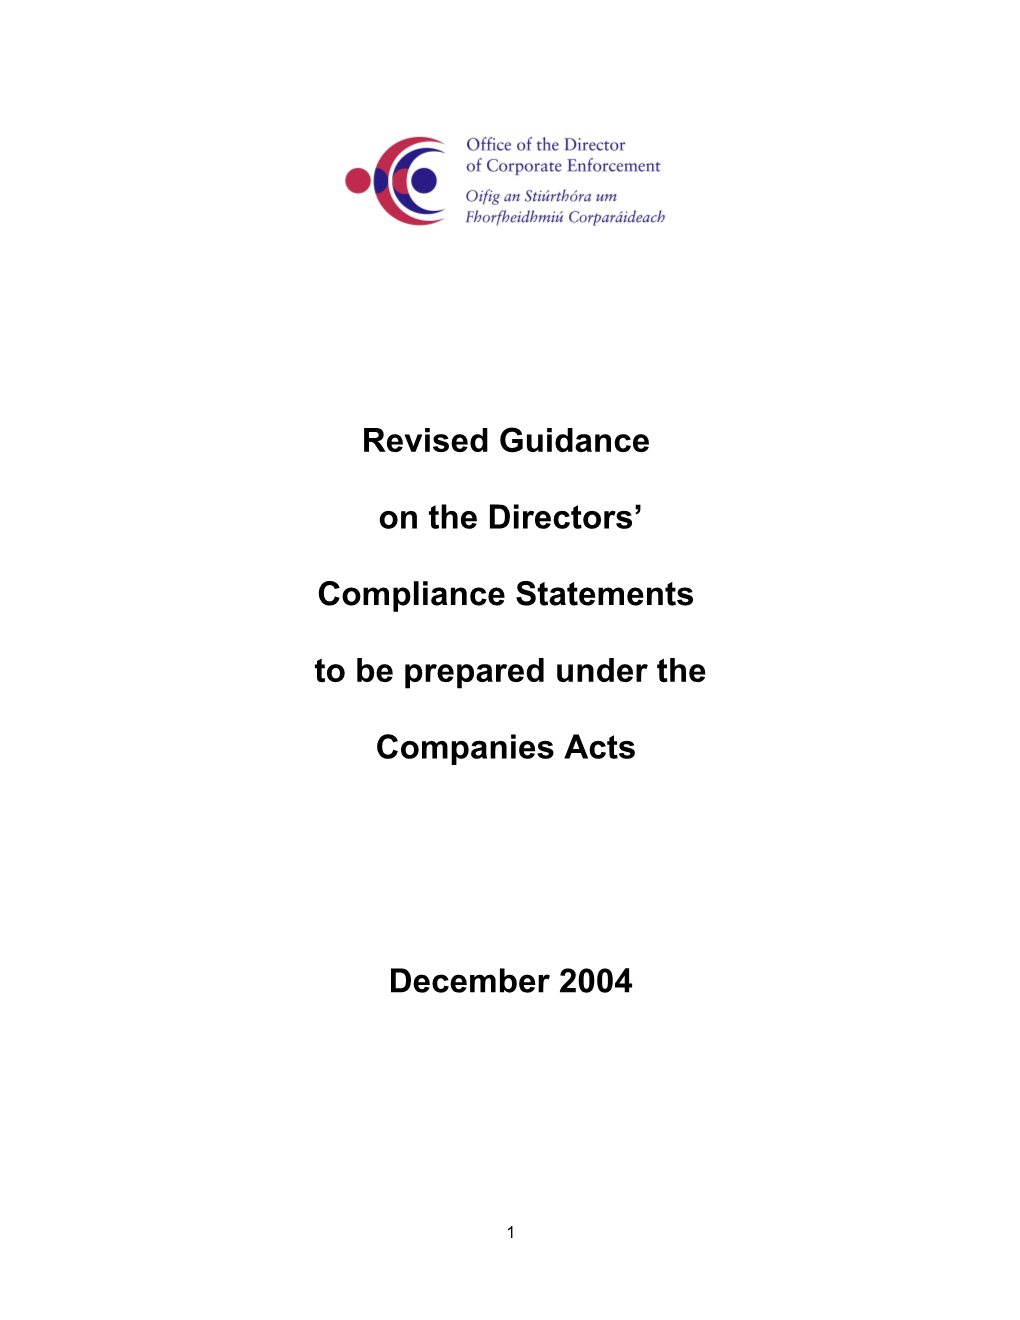 Draft Guidance on the Requirements of Sections 205E and 205F of the Companies Act, 1990